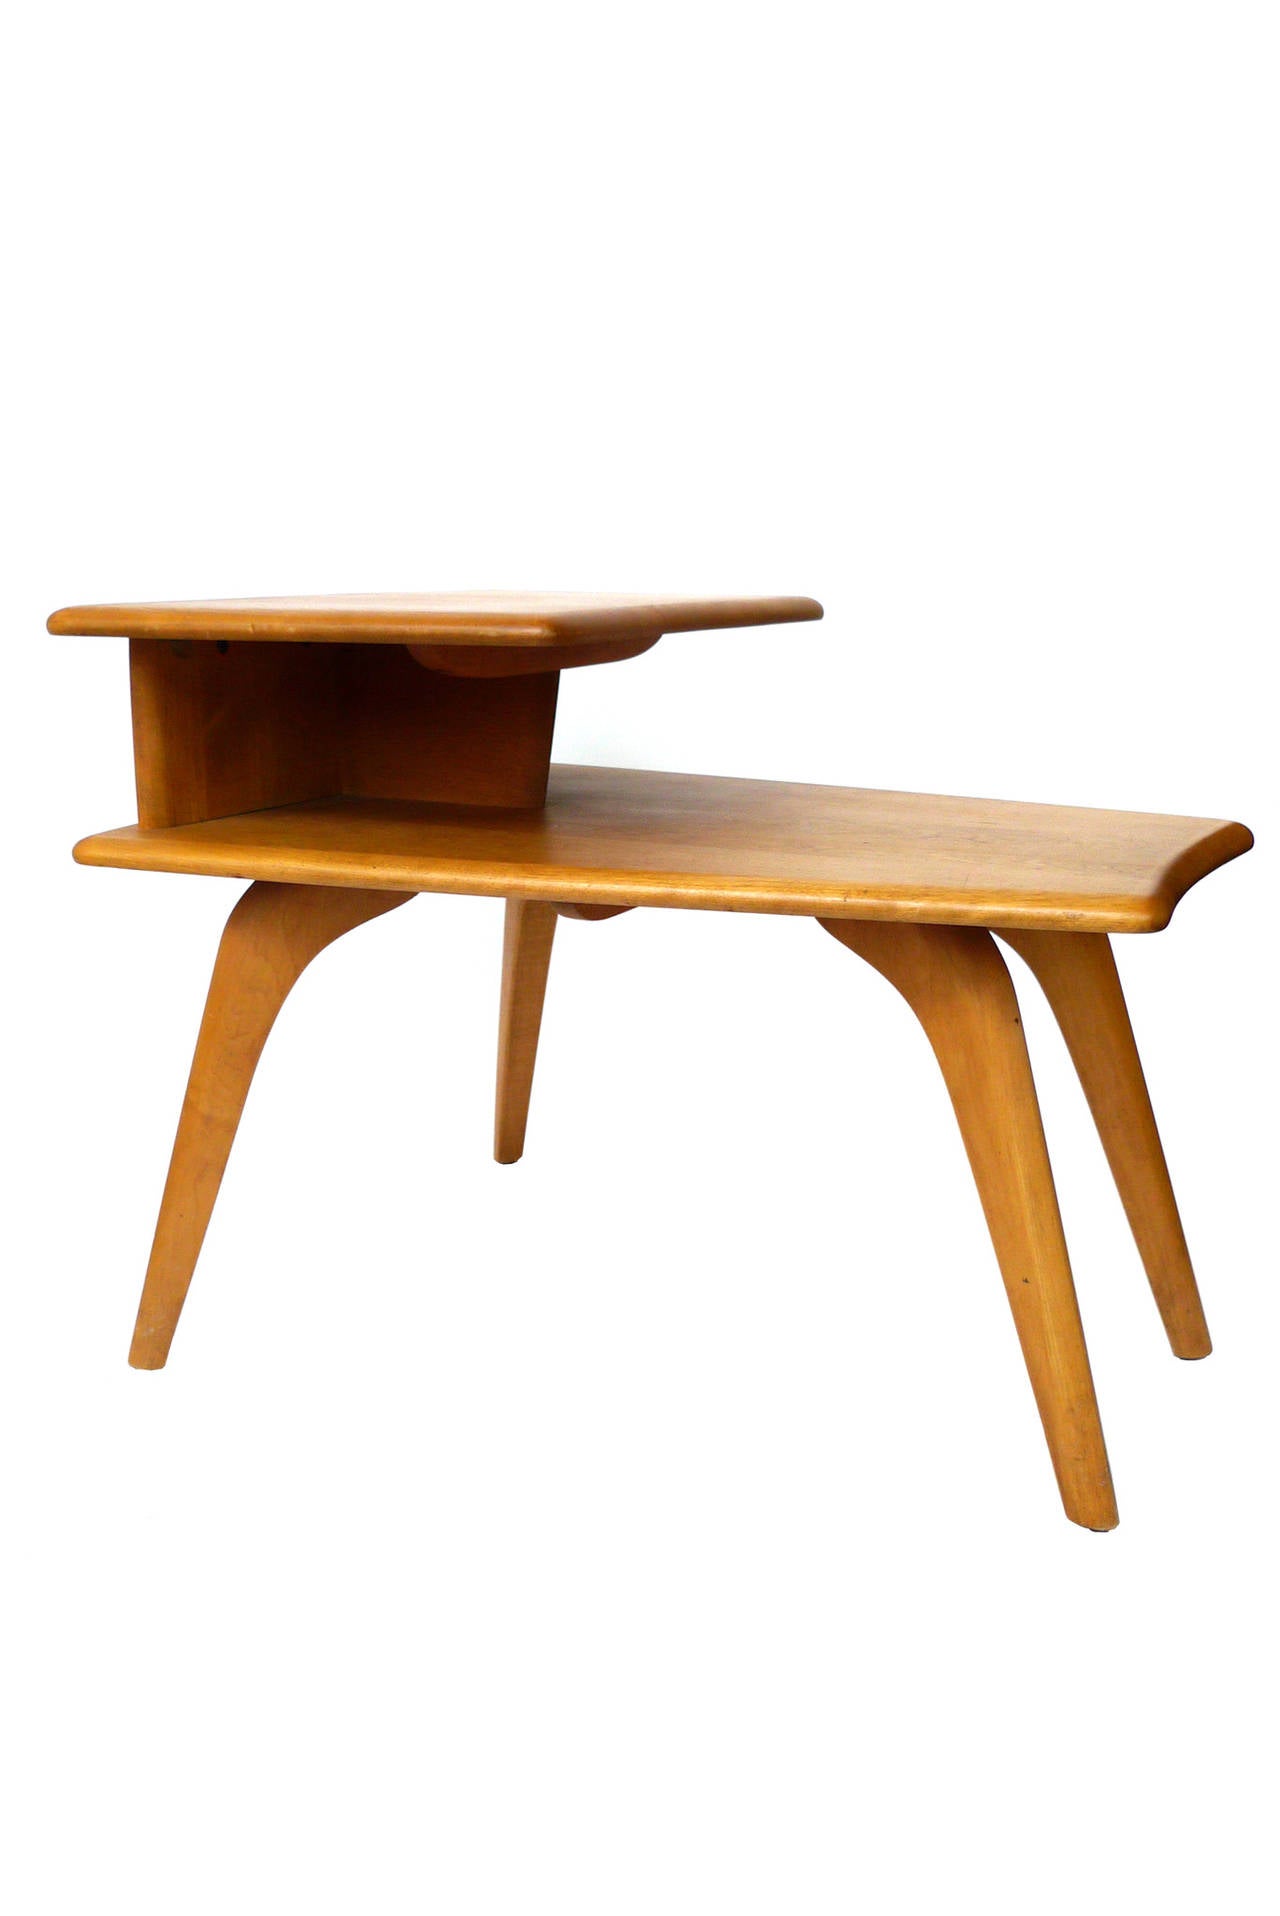 This Midcentury end table is designed by Heywood-Wakefield. Crafted from ashwood, the table has a beautiful wheat finish. Its sculptural form includes two flattops, the upper tier being smaller than the bottom. The legs curve at the top and taper